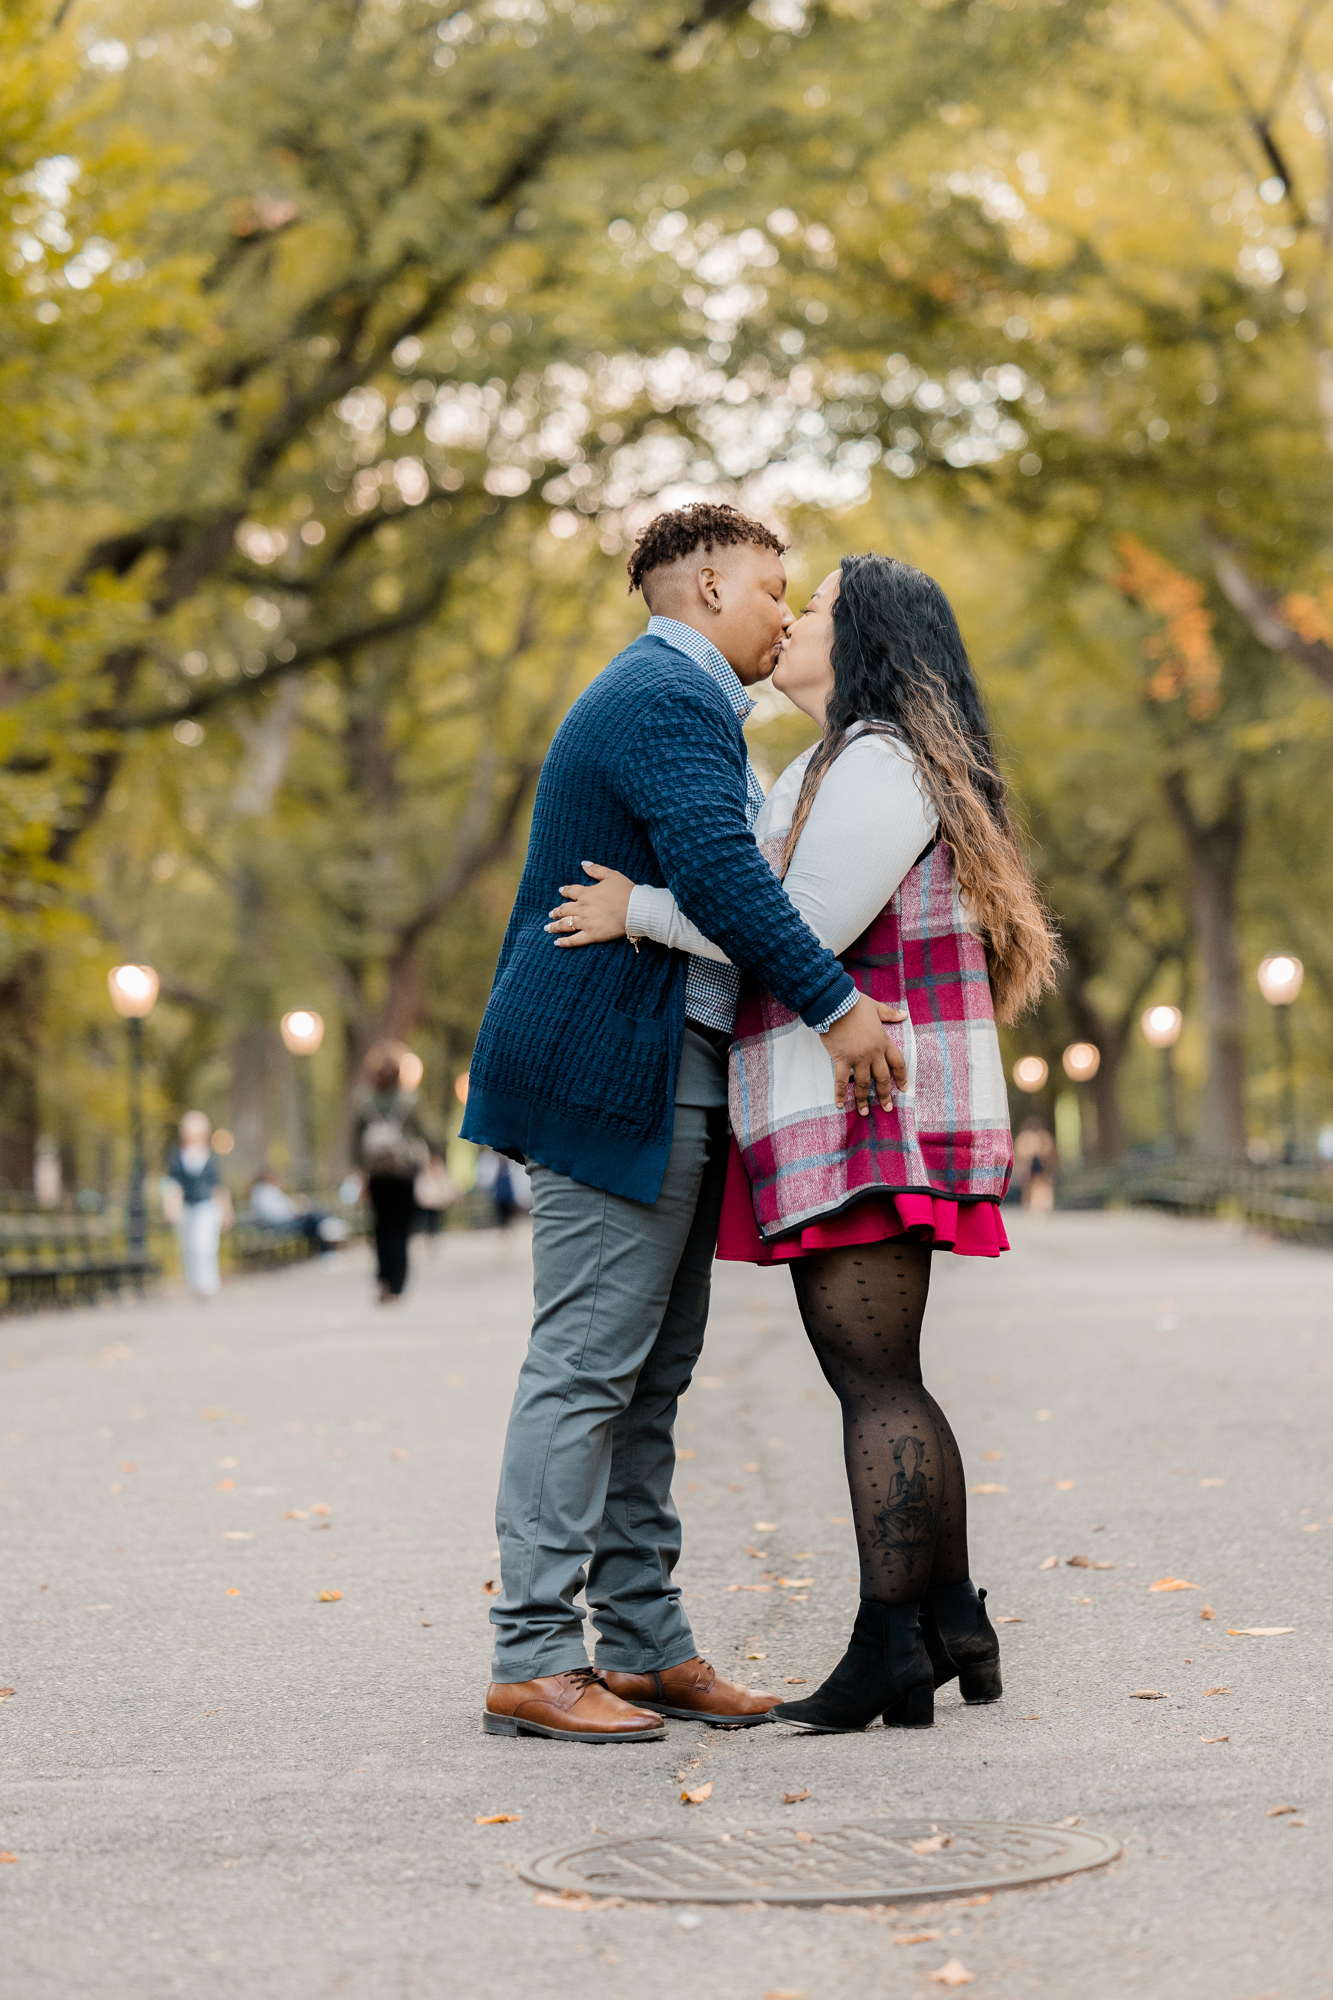 Lovely Central Park Engagement Photos in Autumn at Sunrise